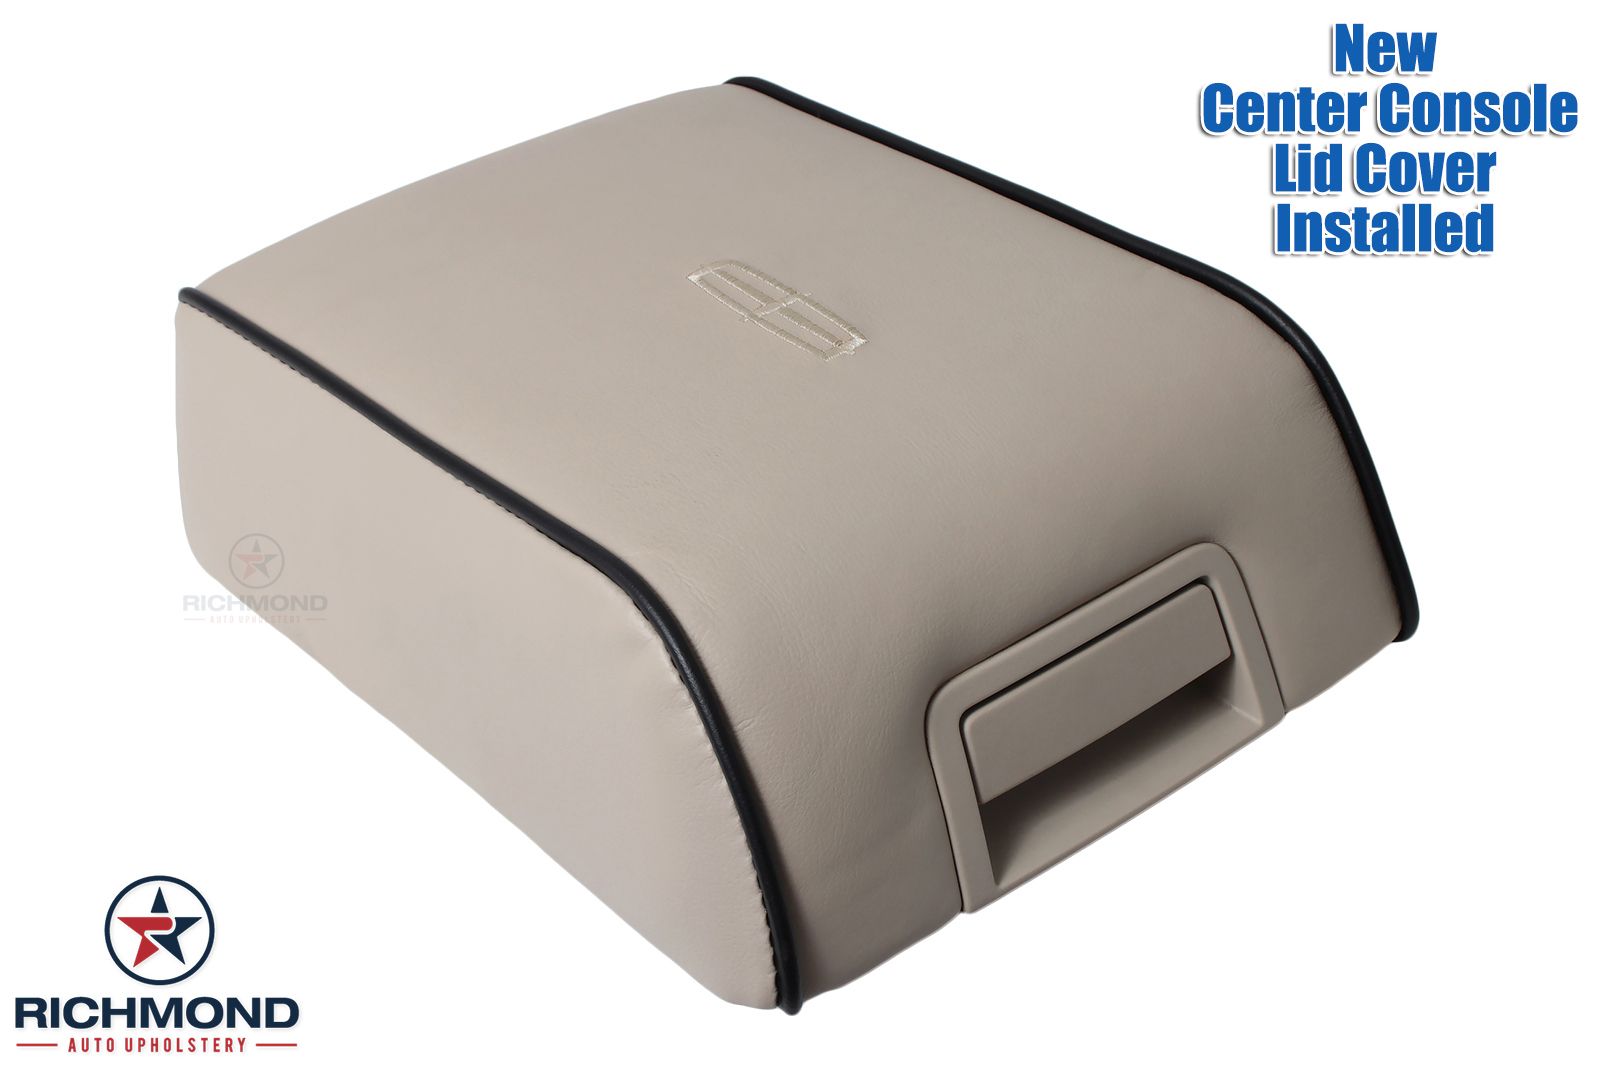 Details About 2006 Lincoln Mark Lt Leather Center Console Lid Cover Armrest Compartment Tan